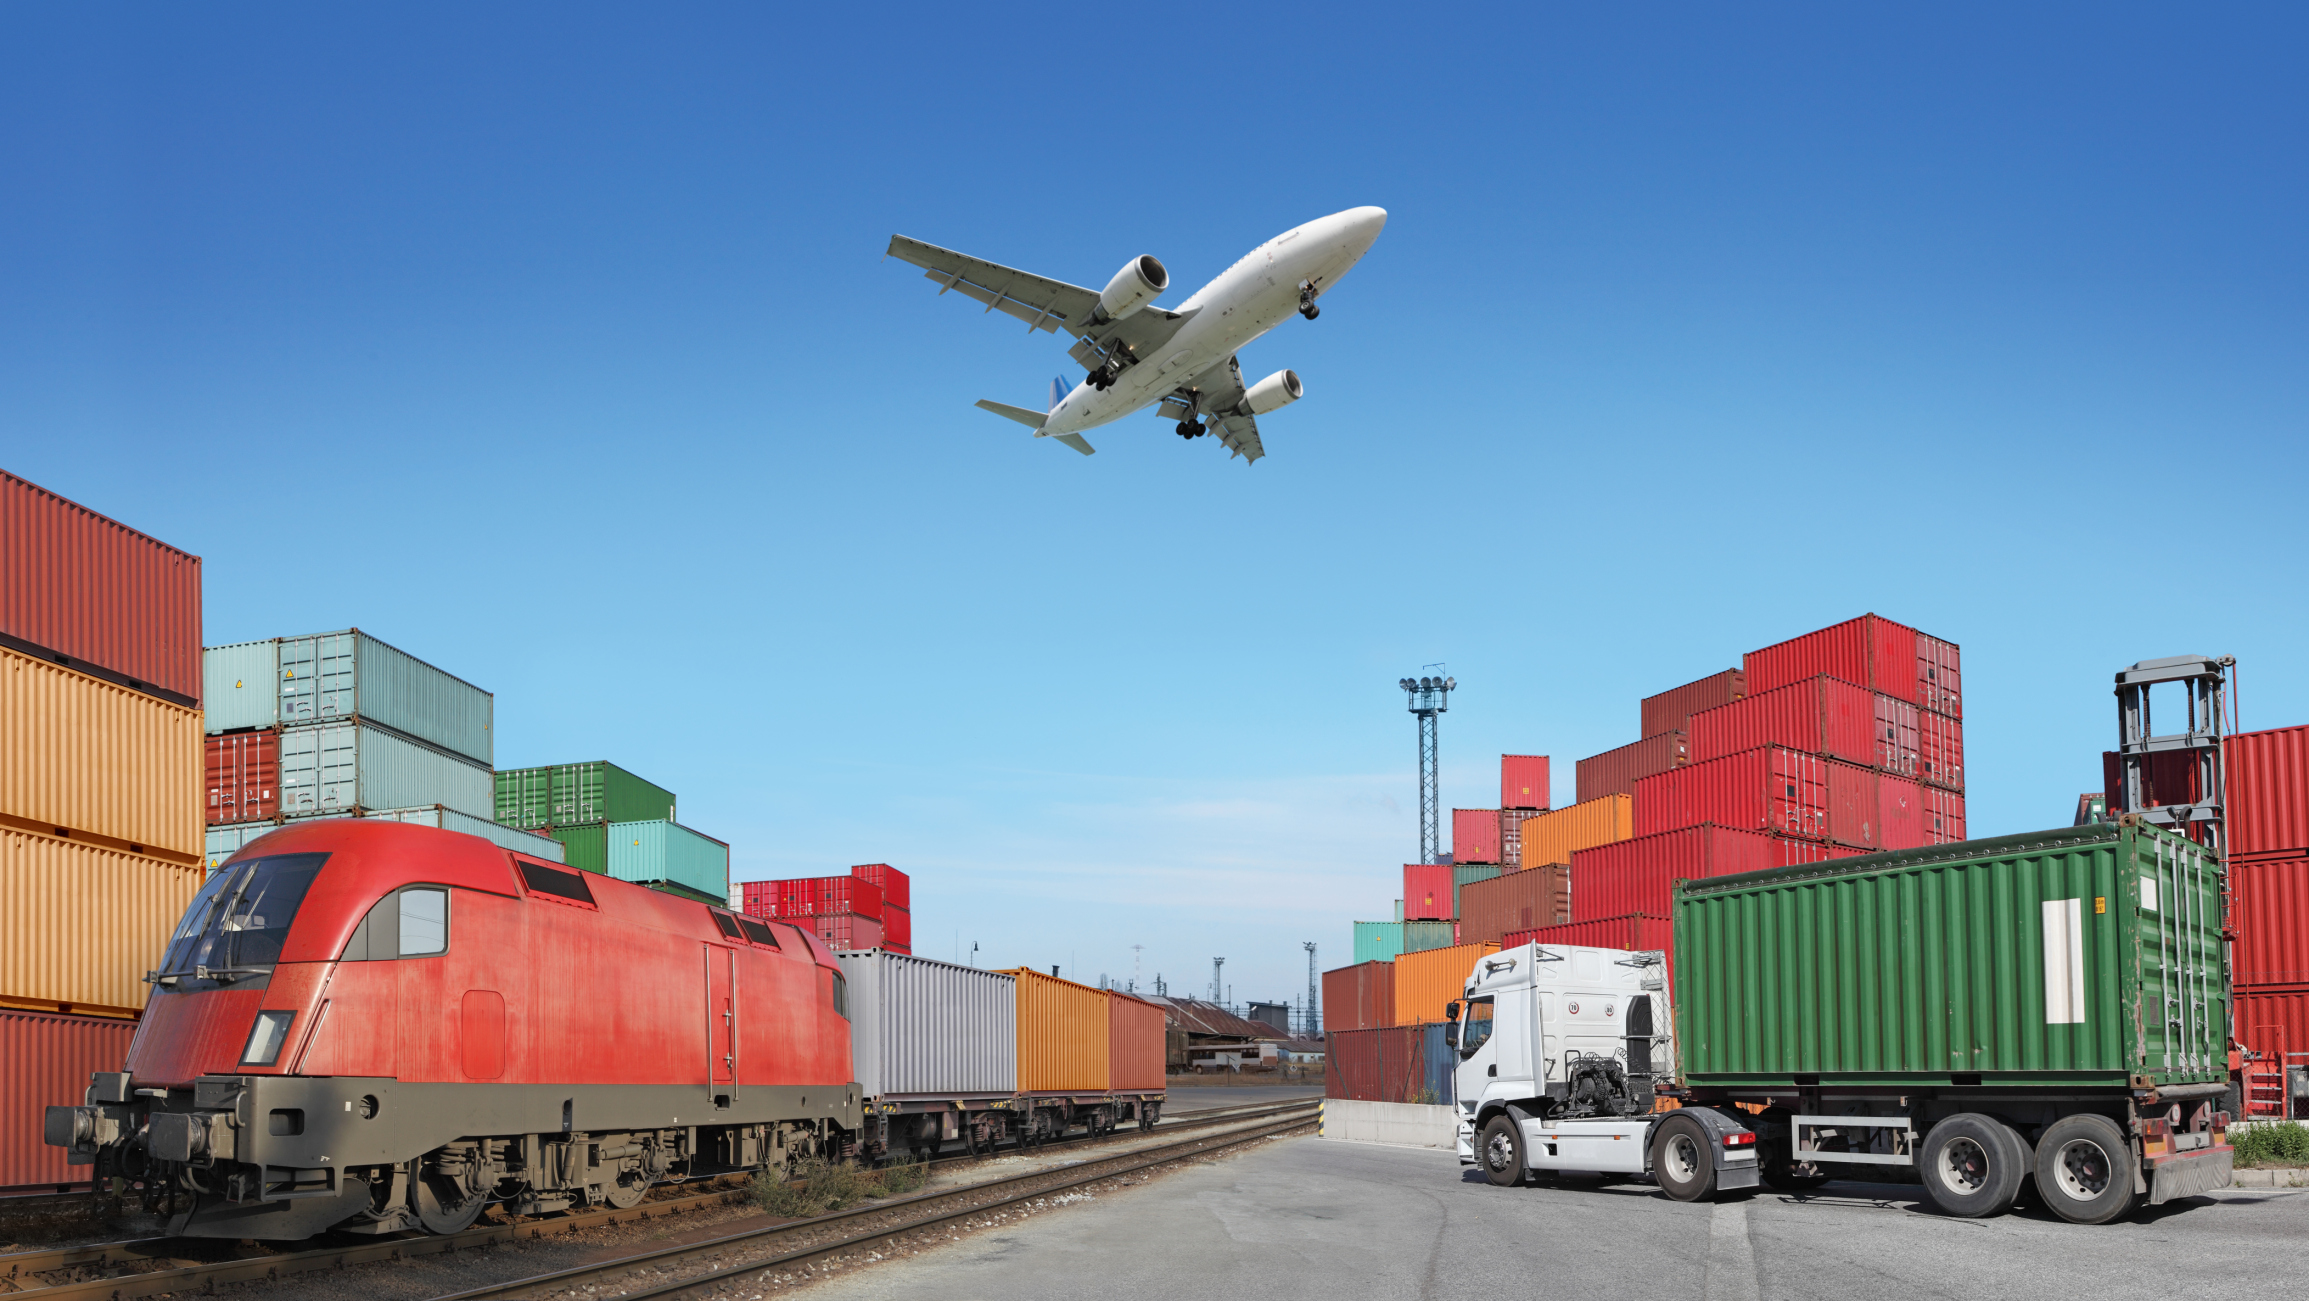 Containers Airplane Sky Colorful Truck Vehicle Railway Train Diesel Locomotive Clear Sky Industrial 2309x1301